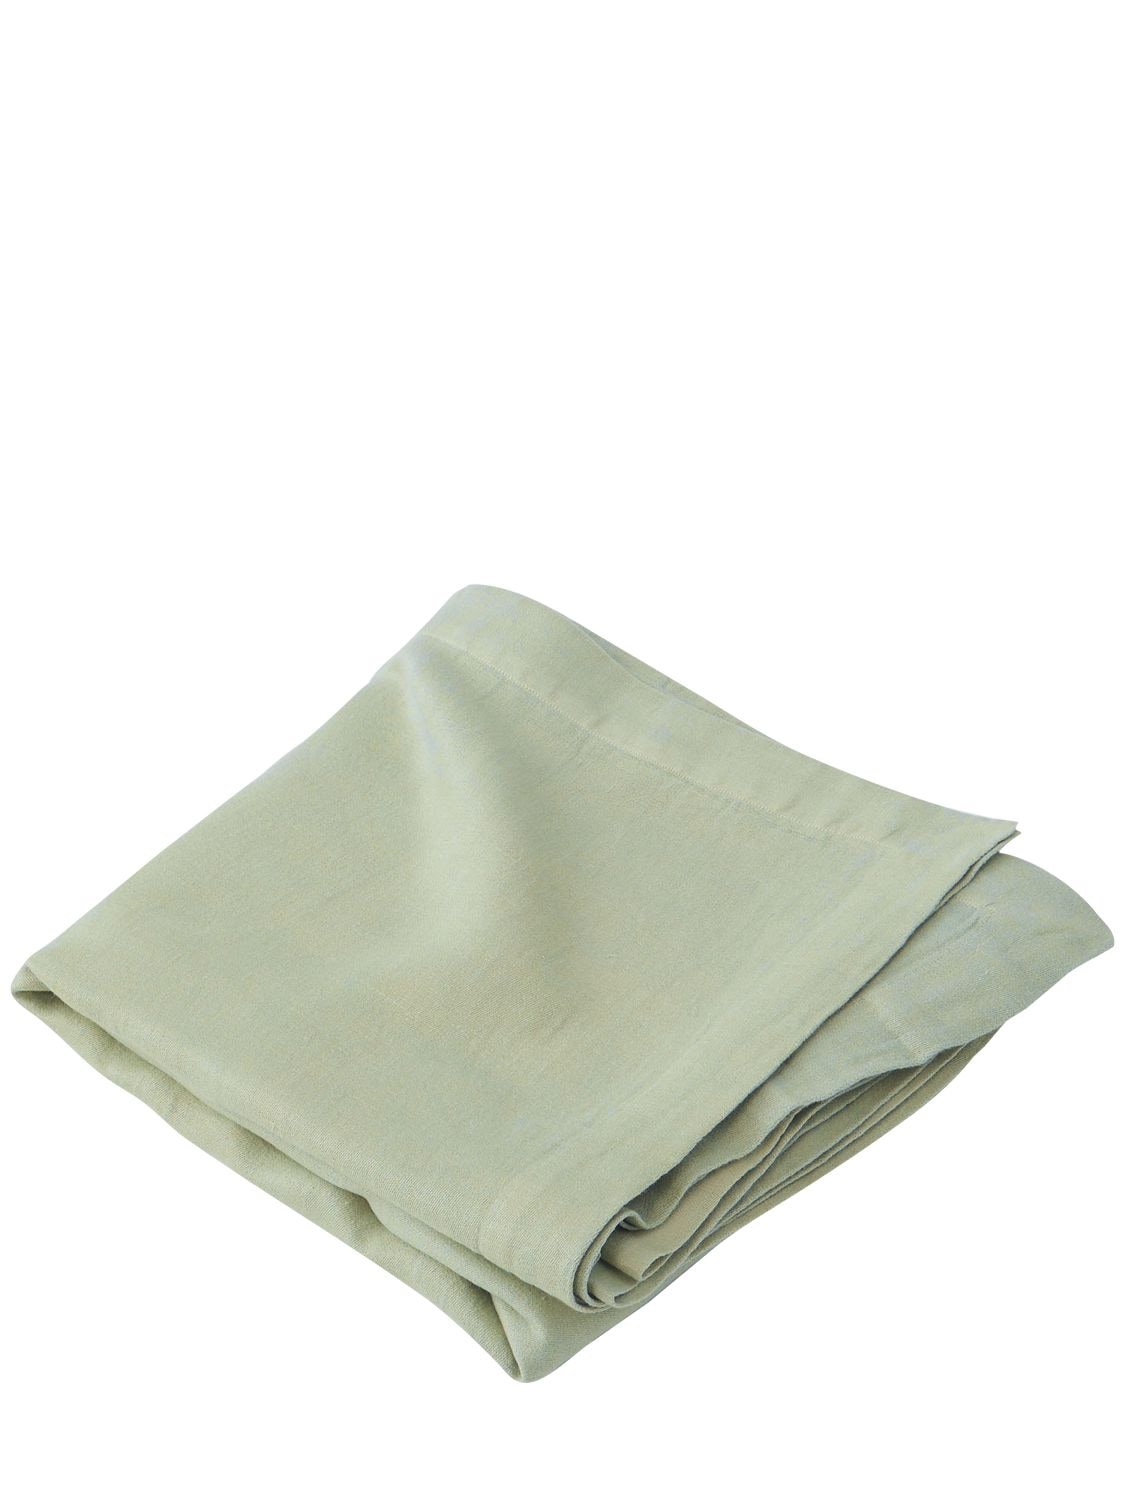 Image of Linen Tablecloth